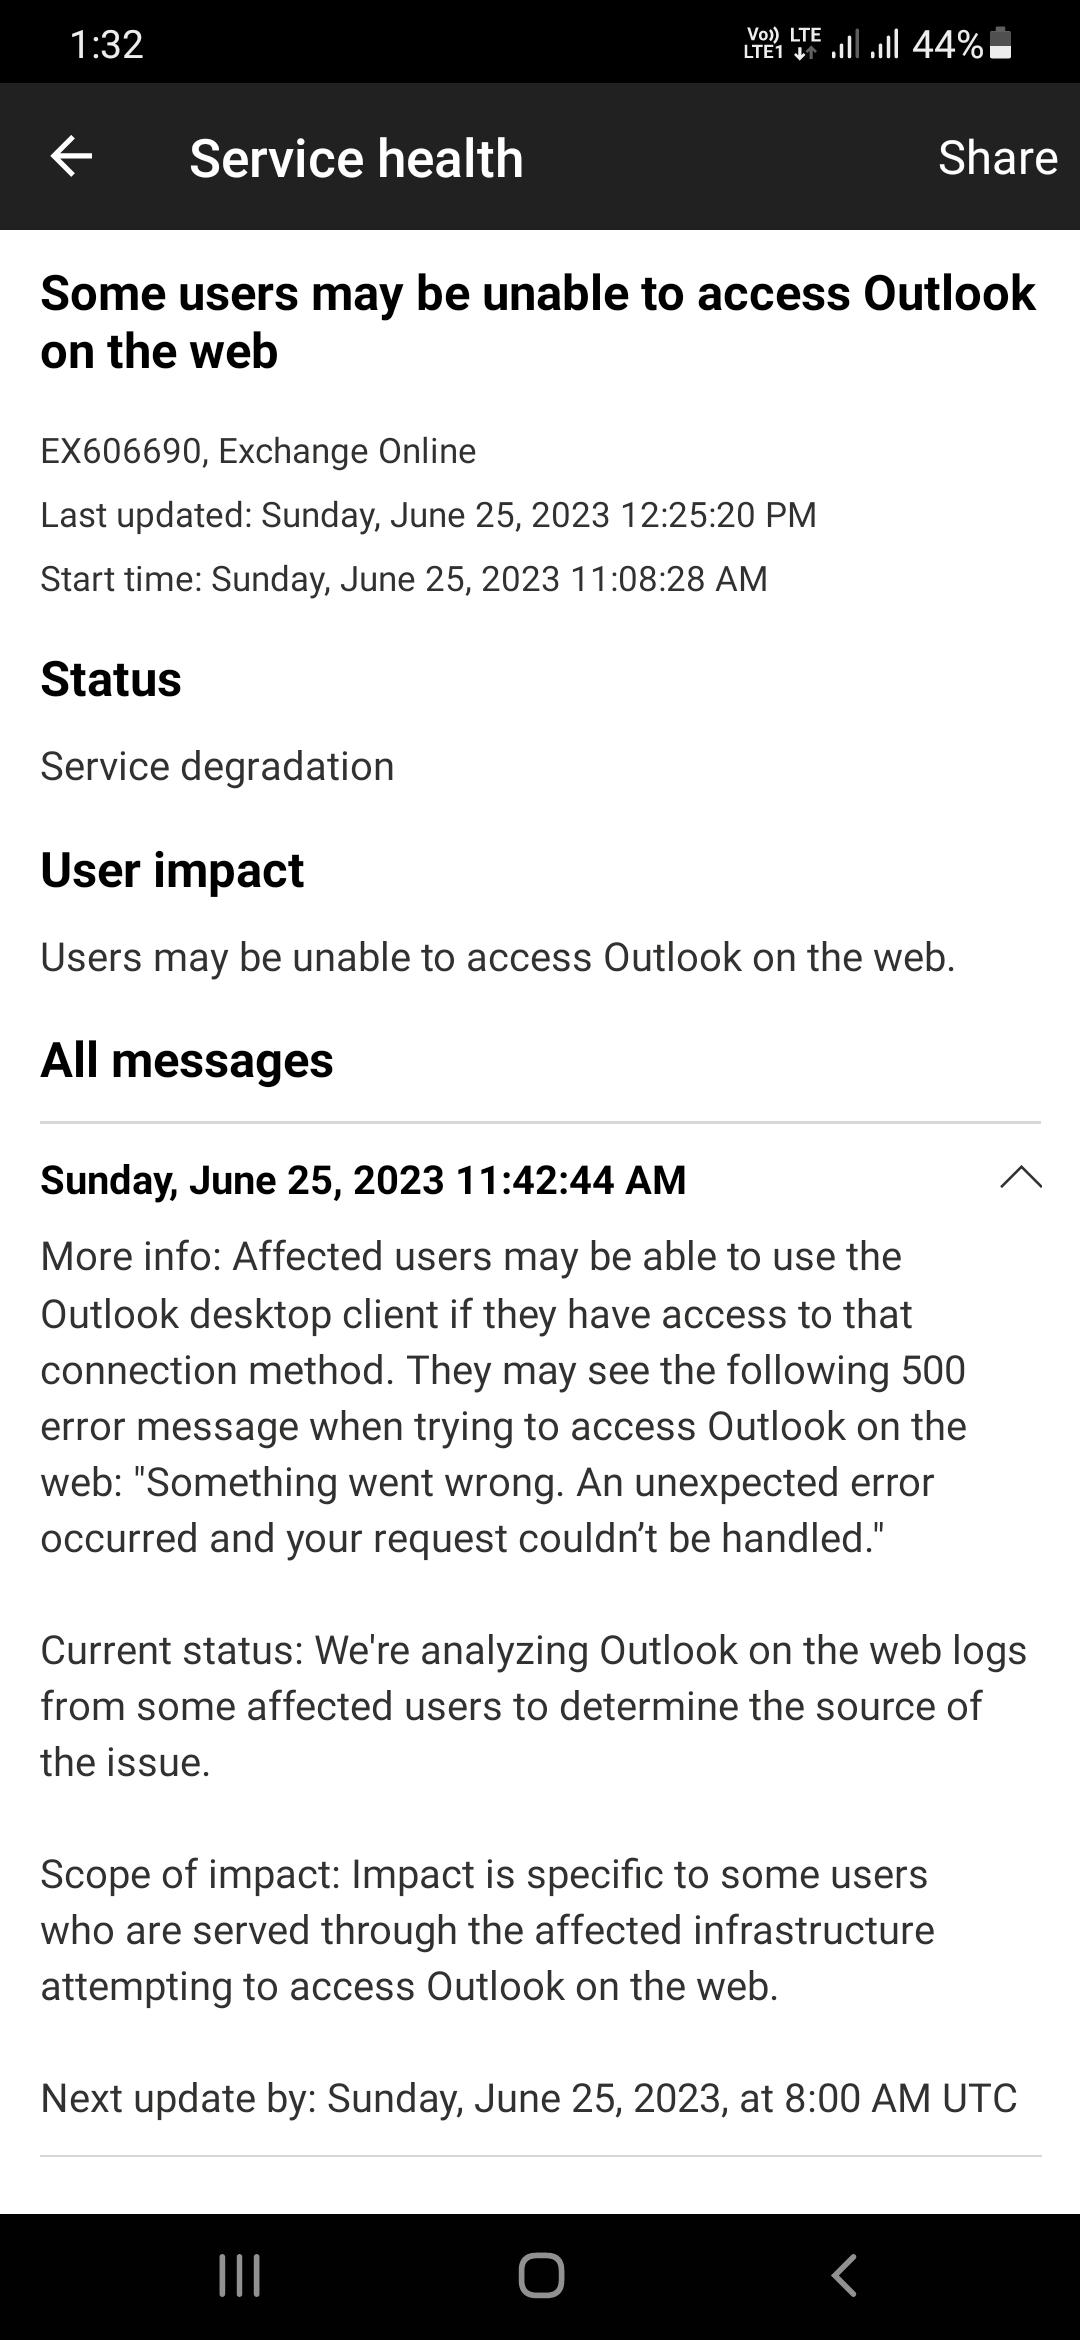 Hotmail users, login to Outlook.com for a refreshing new look!